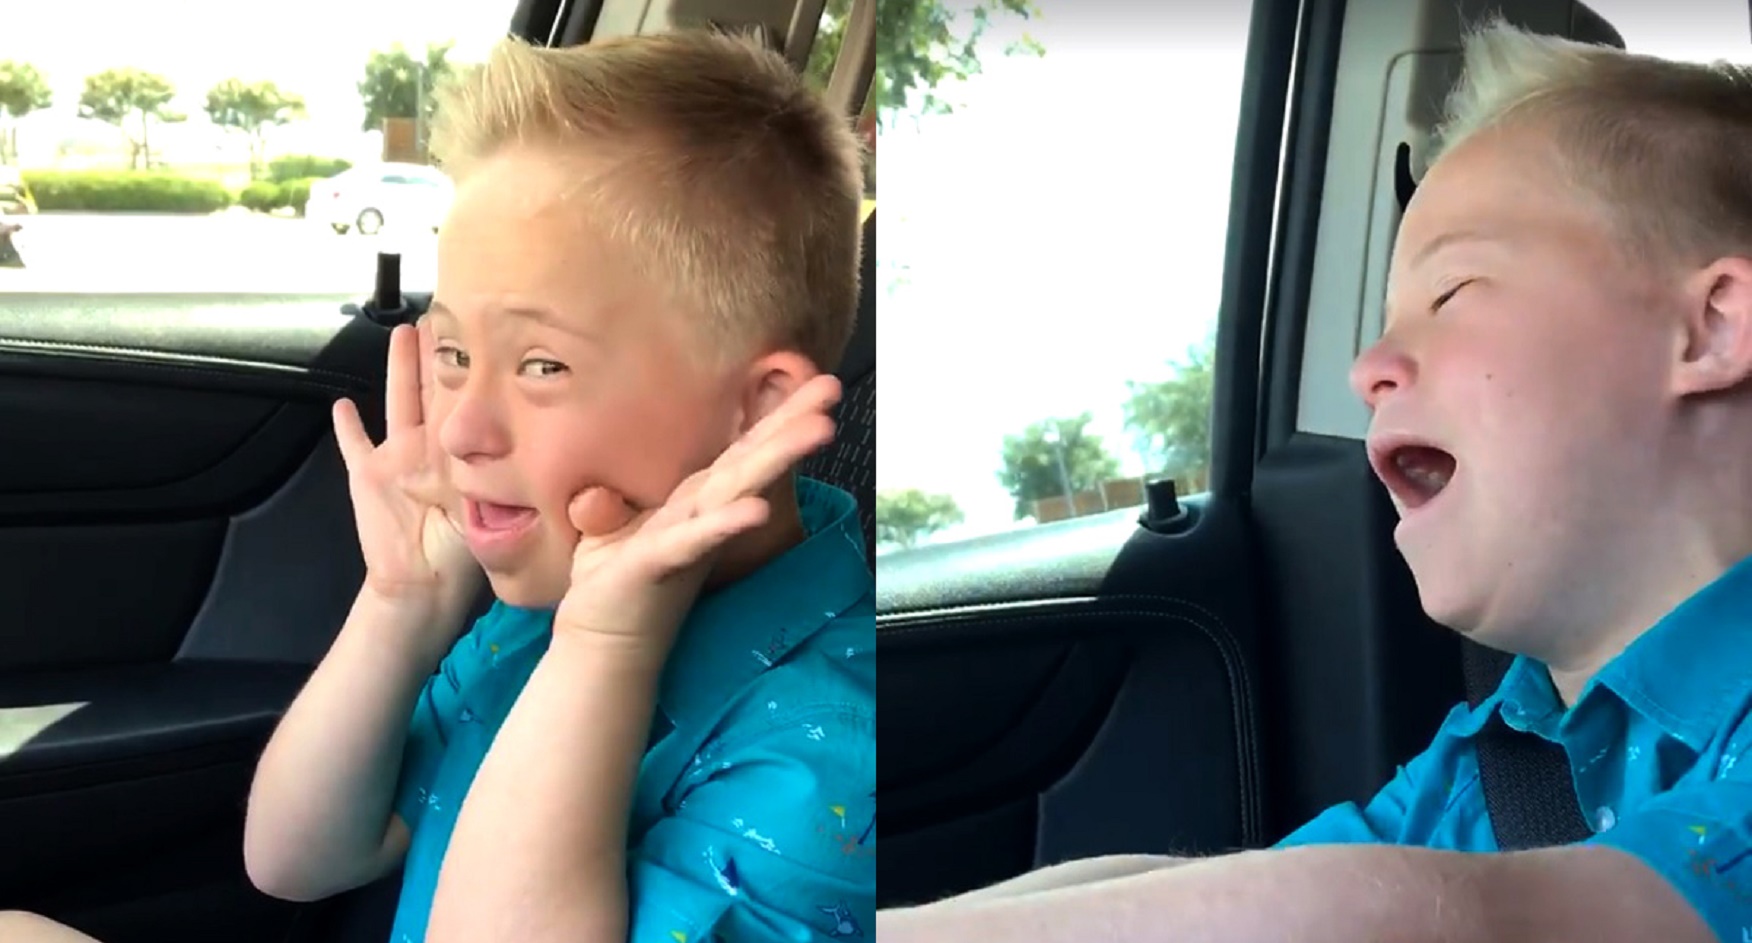 This 9 year old with Down Syndrome singing Whitney Houston will melt your heart